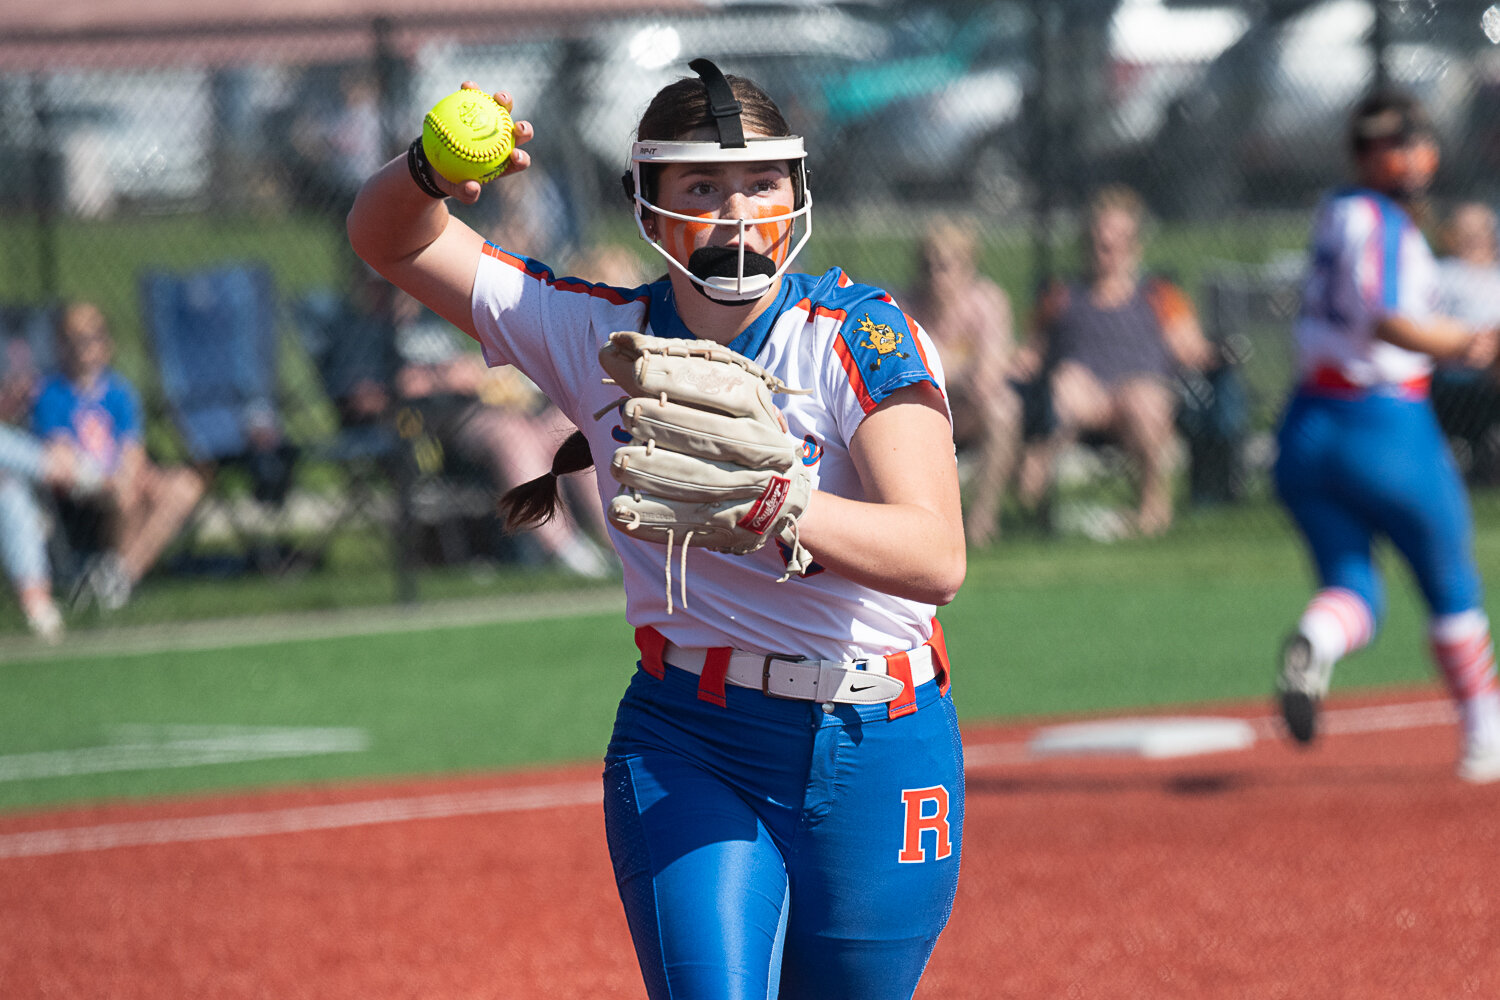 Ridgefield's Elizabeth Peery throws to first during the Spudders' 7-5 win over W.F. West in the quarterfinals of the 2A District 4 tournament on May 18 at Rec Park in Chehalis.